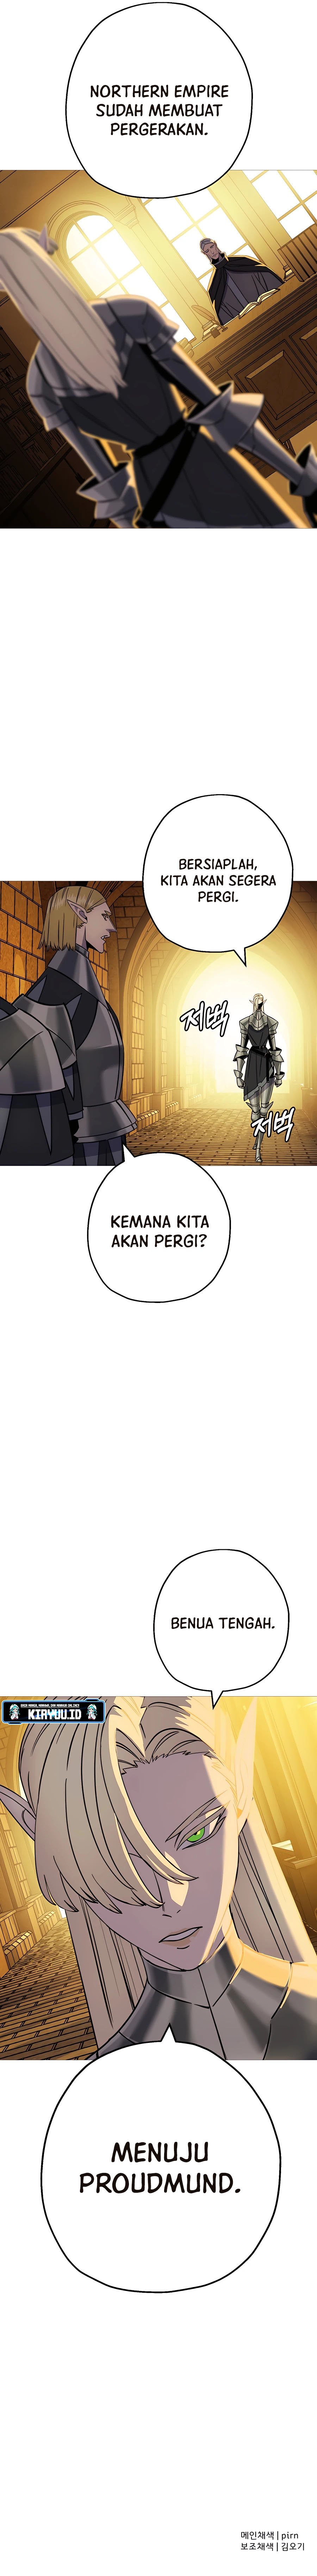 Dilarang COPAS - situs resmi www.mangacanblog.com - Komik the story of a low rank soldier becoming a monarch 122 - chapter 122 123 Indonesia the story of a low rank soldier becoming a monarch 122 - chapter 122 Terbaru 12|Baca Manga Komik Indonesia|Mangacan